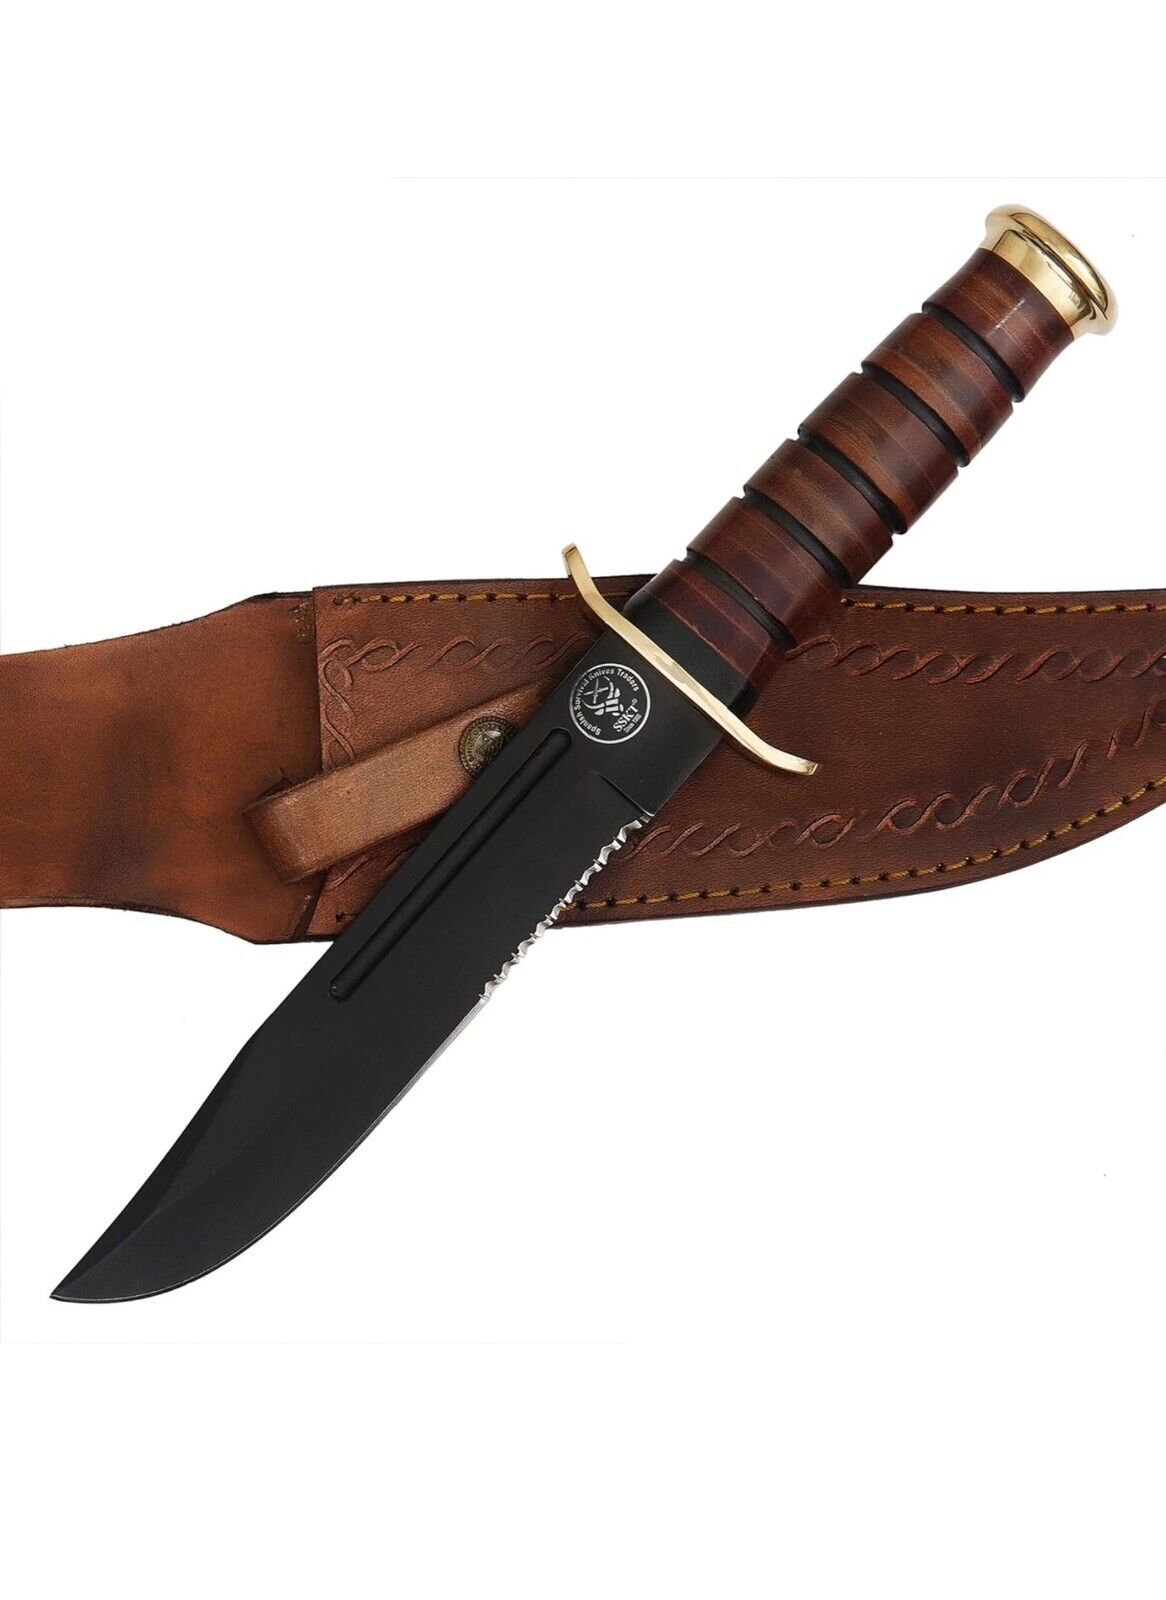 13 Inches D2 Steel Hunting Knife 6mm Thickness With Leather Sheath